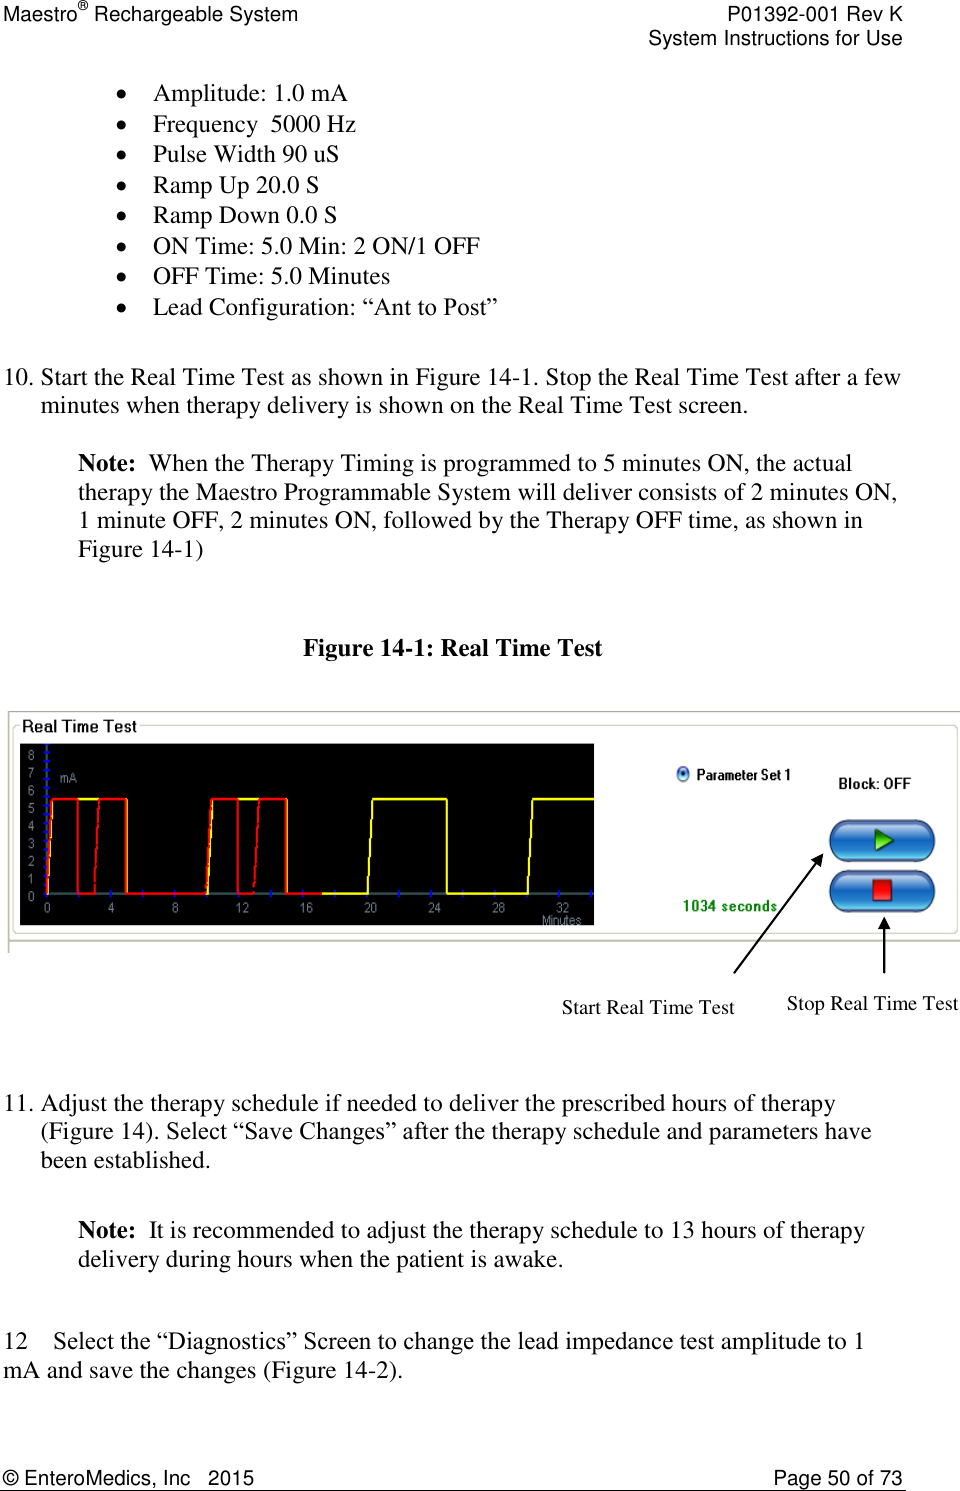 Maestro® Rechargeable System    P01392-001 Rev K     System Instructions for Use  © EnteroMedics, Inc   2015  Page 50 of 73  Stop Real Time Test Start Real Time Test  Amplitude: 1.0 mA  Frequency  5000 Hz  Pulse Width 90 uS  Ramp Up 20.0 S  Ramp Down 0.0 S  ON Time: 5.0 Min: 2 ON/1 OFF  OFF Time: 5.0 Minutes  Lead Configuration: “Ant to Post”  10. Start the Real Time Test as shown in Figure 14-1. Stop the Real Time Test after a few minutes when therapy delivery is shown on the Real Time Test screen.  Note:  When the Therapy Timing is programmed to 5 minutes ON, the actual therapy the Maestro Programmable System will deliver consists of 2 minutes ON, 1 minute OFF, 2 minutes ON, followed by the Therapy OFF time, as shown in Figure 14-1)   Figure 14-1: Real Time Test      11. Adjust the therapy schedule if needed to deliver the prescribed hours of therapy (Figure 14). Select “Save Changes” after the therapy schedule and parameters have been established.  Note:  It is recommended to adjust the therapy schedule to 13 hours of therapy delivery during hours when the patient is awake.  12    Select the “Diagnostics” Screen to change the lead impedance test amplitude to 1 mA and save the changes (Figure 14-2).  